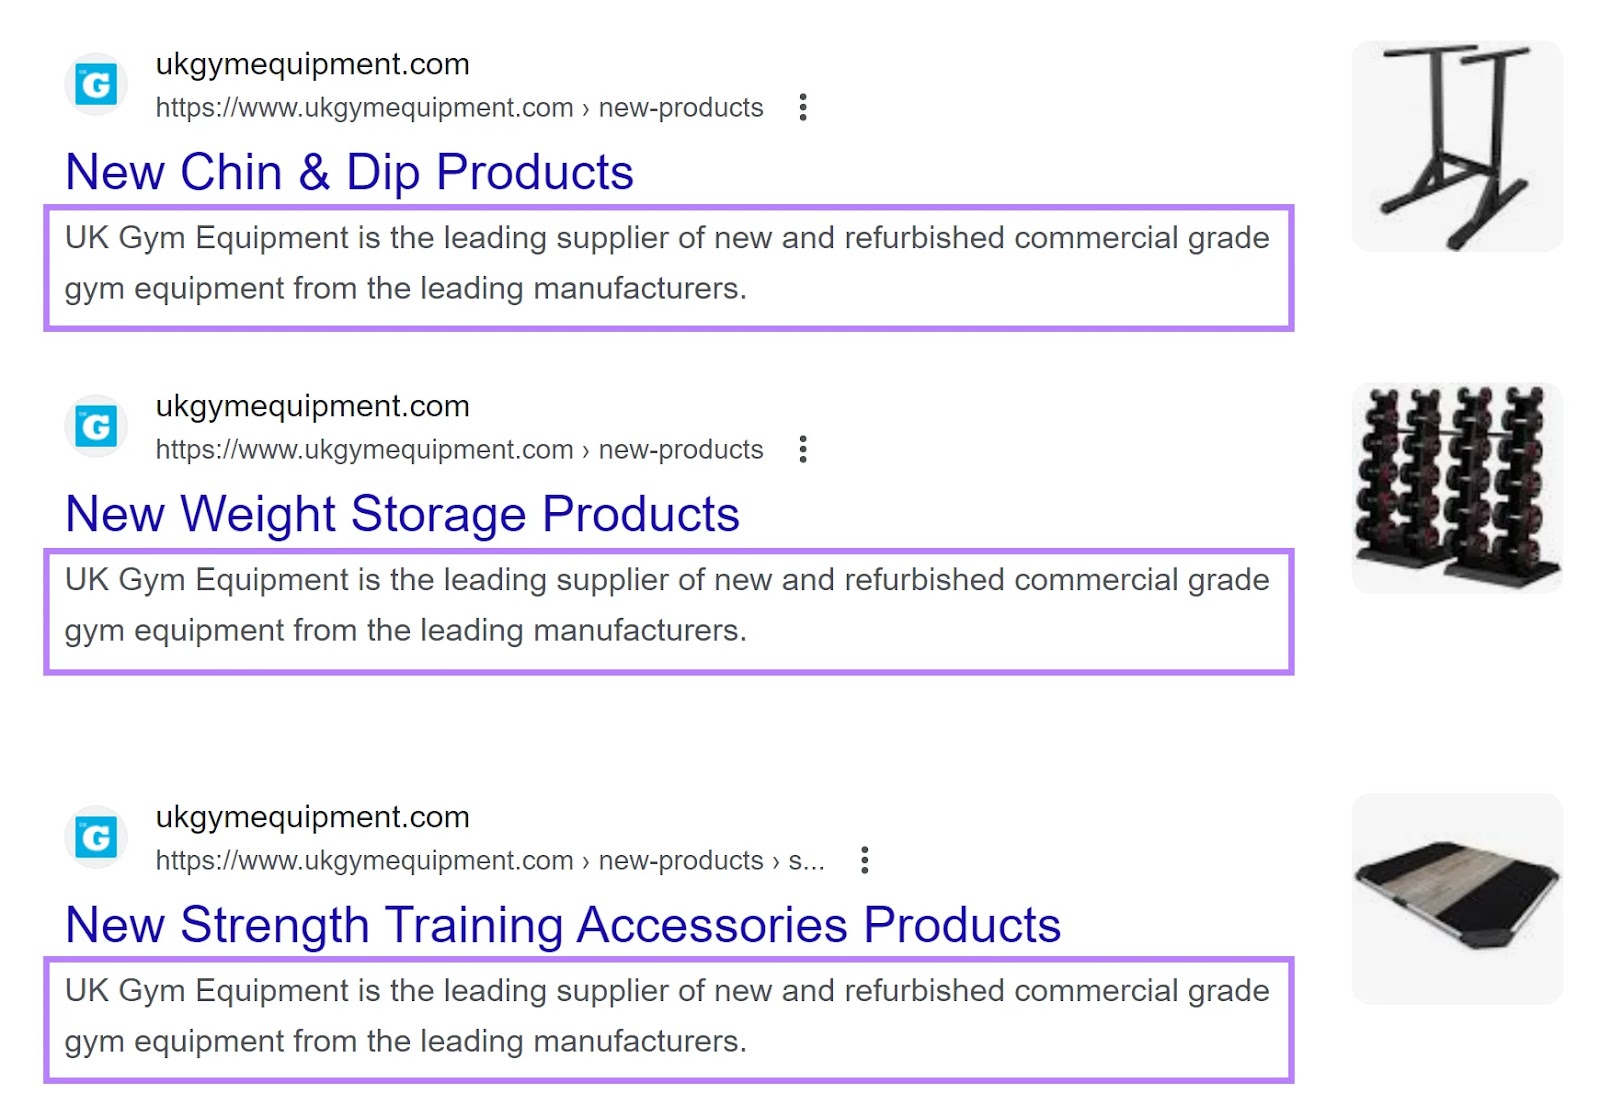 Search engine results page showing duplicate meta descriptions for different pages.